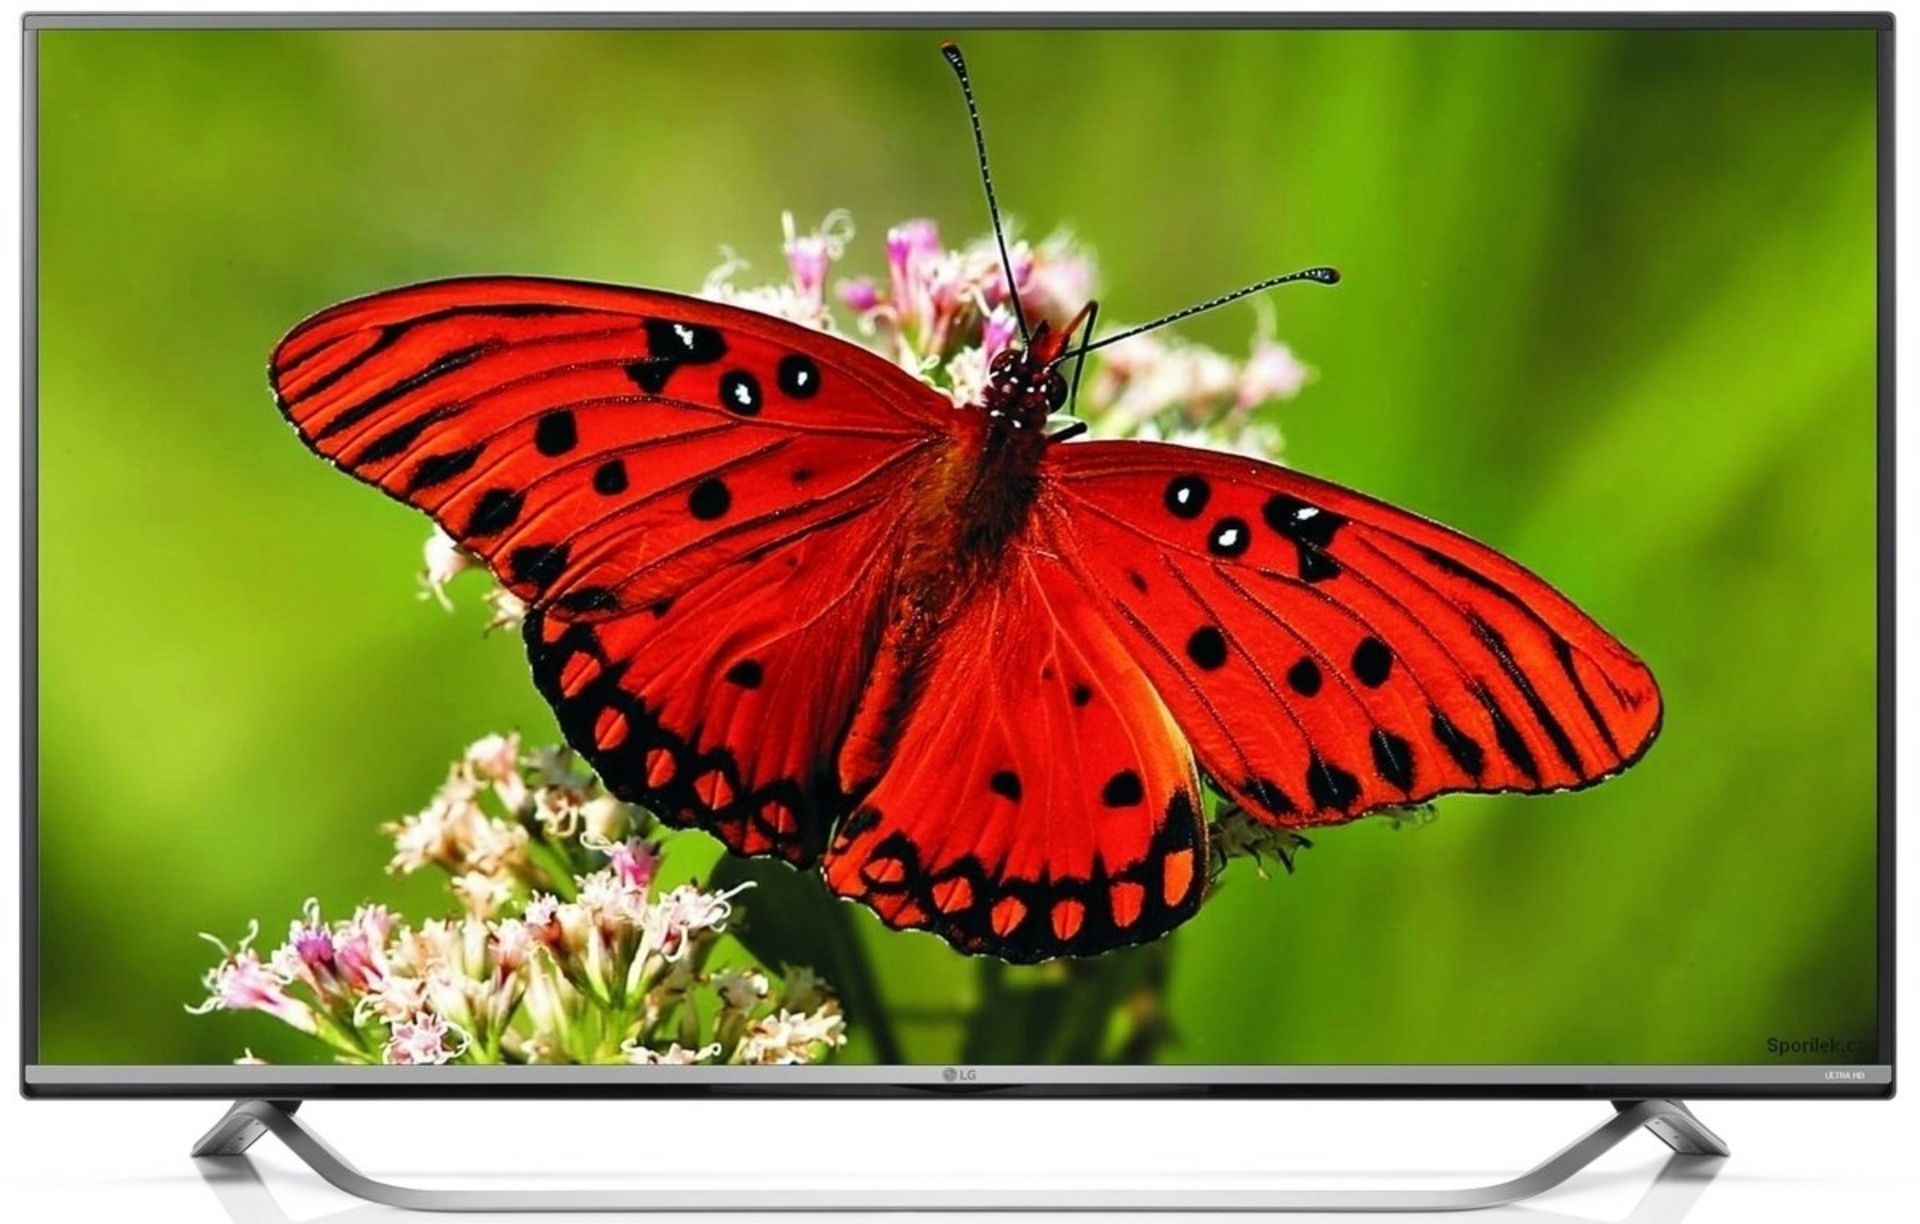 V Grade A 60" 4K ULTRA HD SMART WEBOS 2.0 WIFI TV WITH FREEVIEW HD 60UF778V (Item Will Be